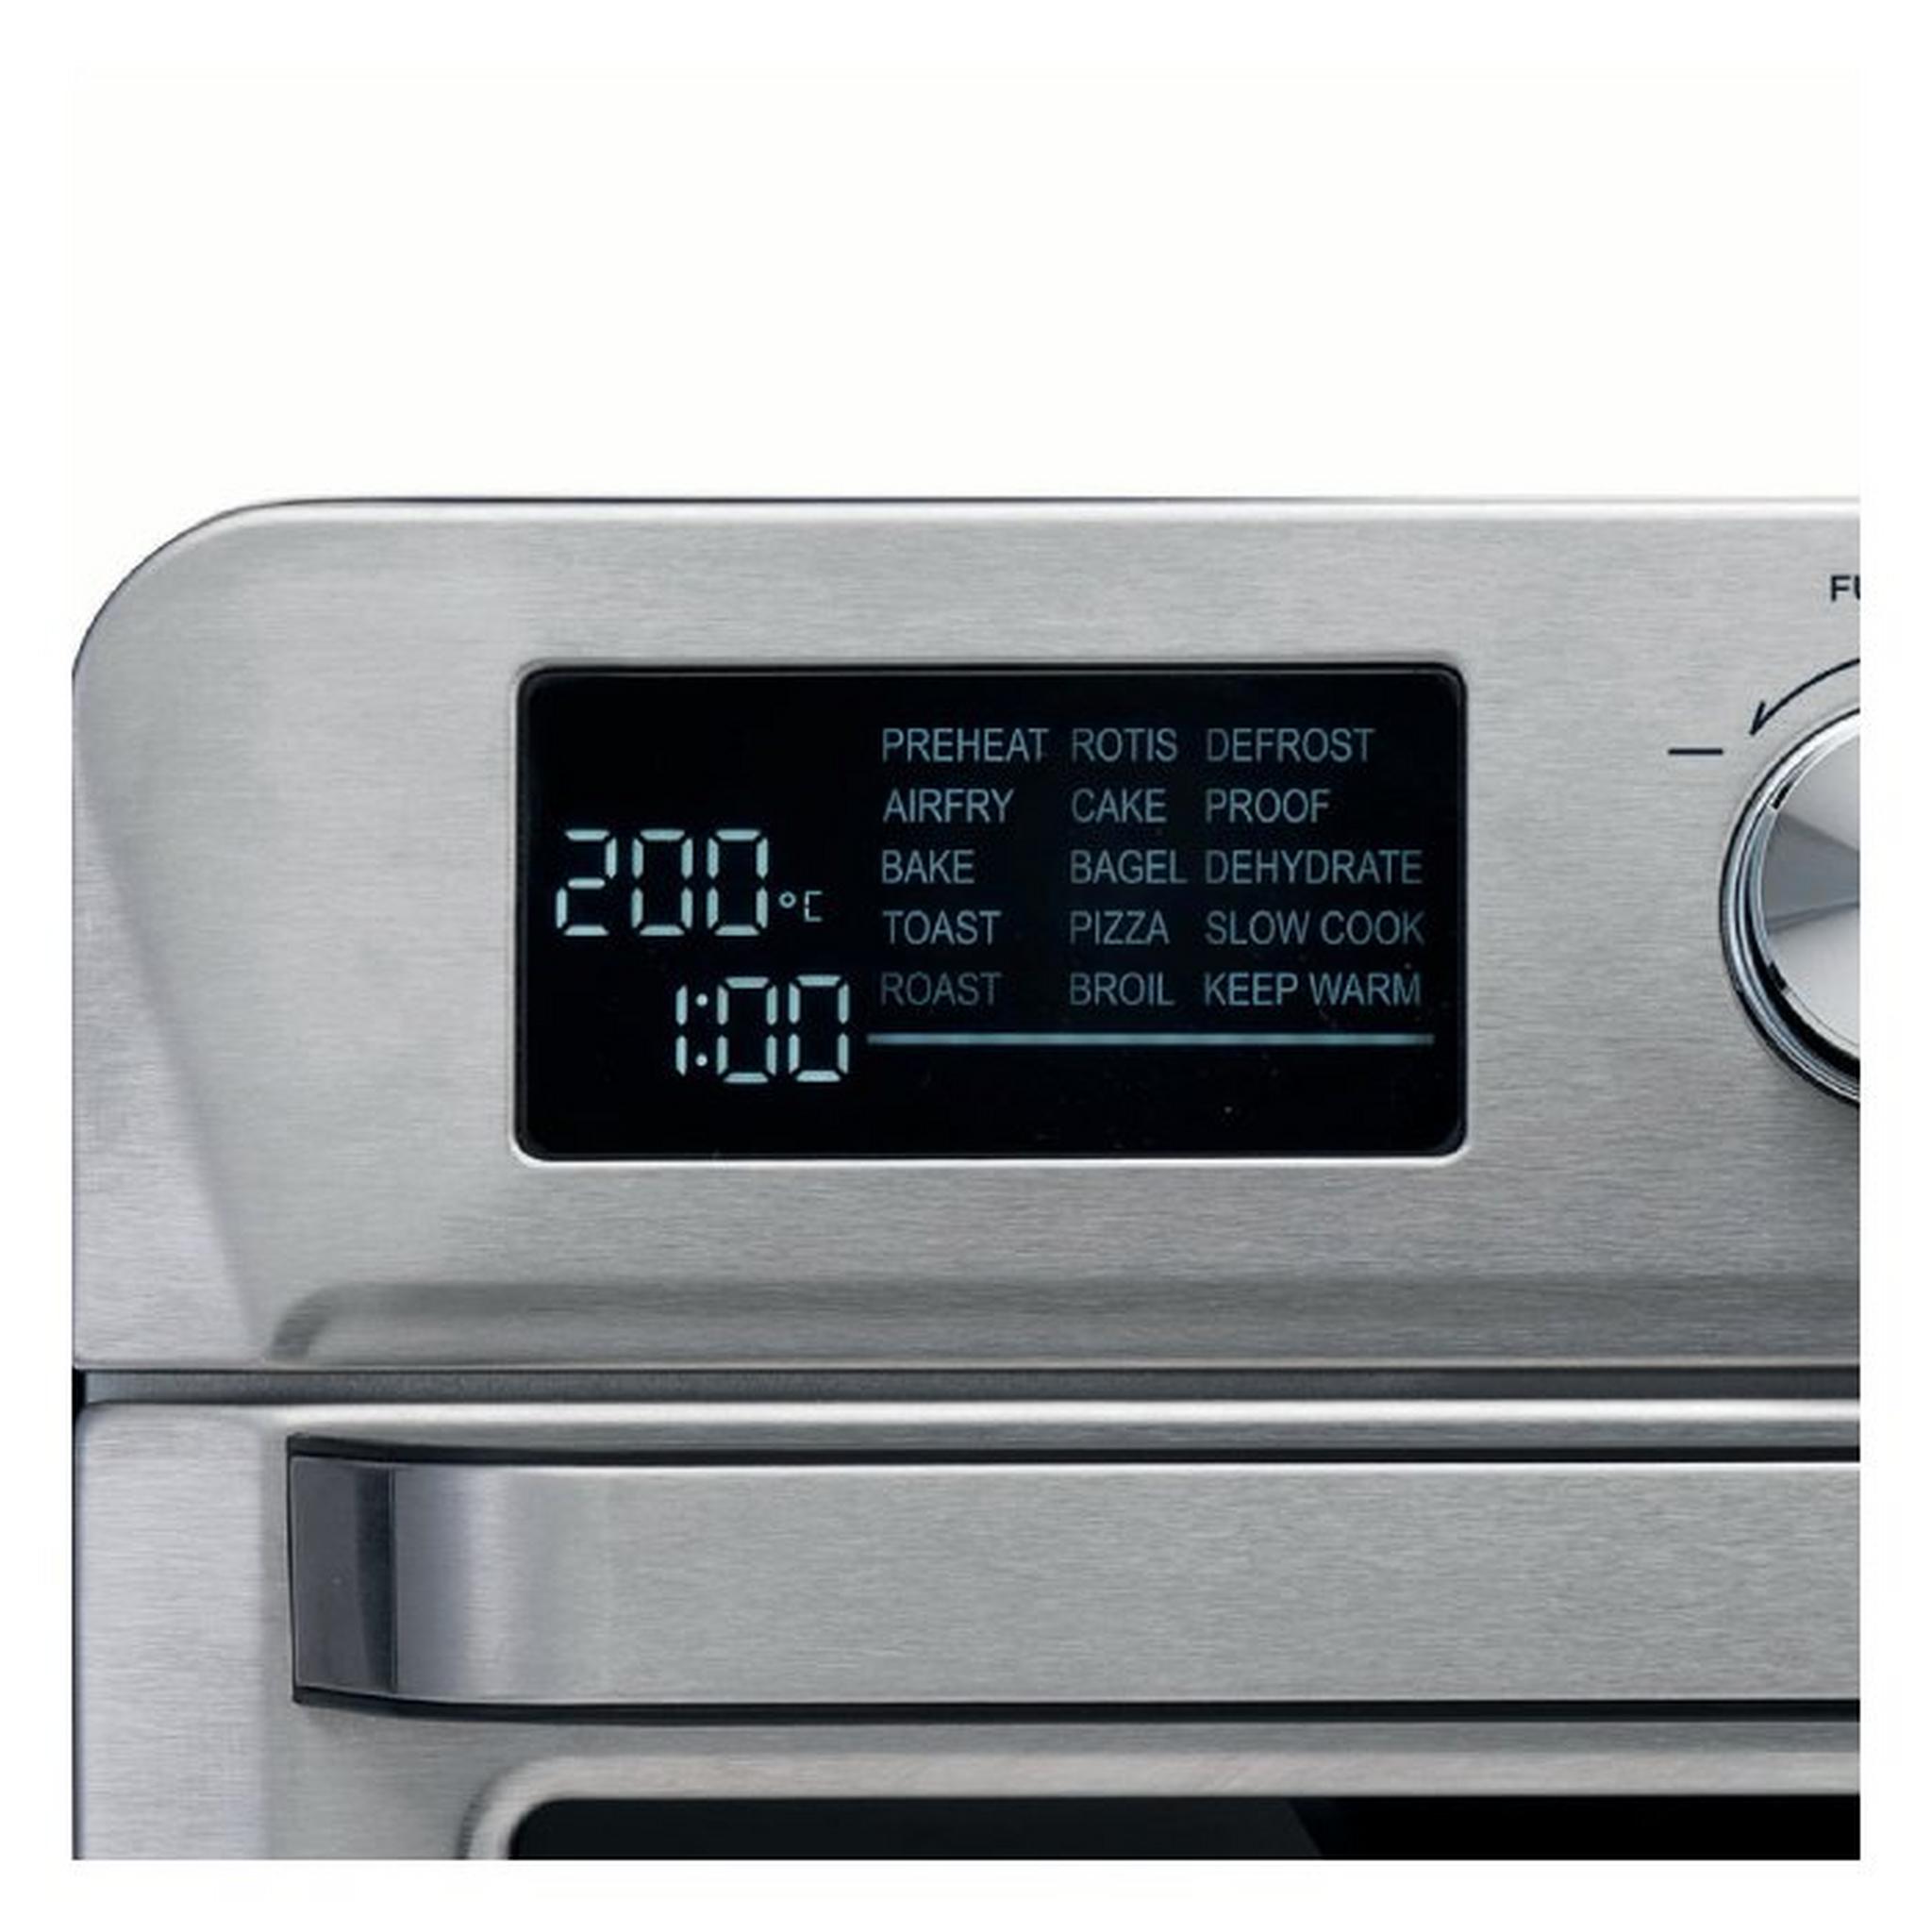 KENWOOD 2 in 1 Air Fryer Oven, 1700W, 25L, MOA26.600SS – Stainless steel